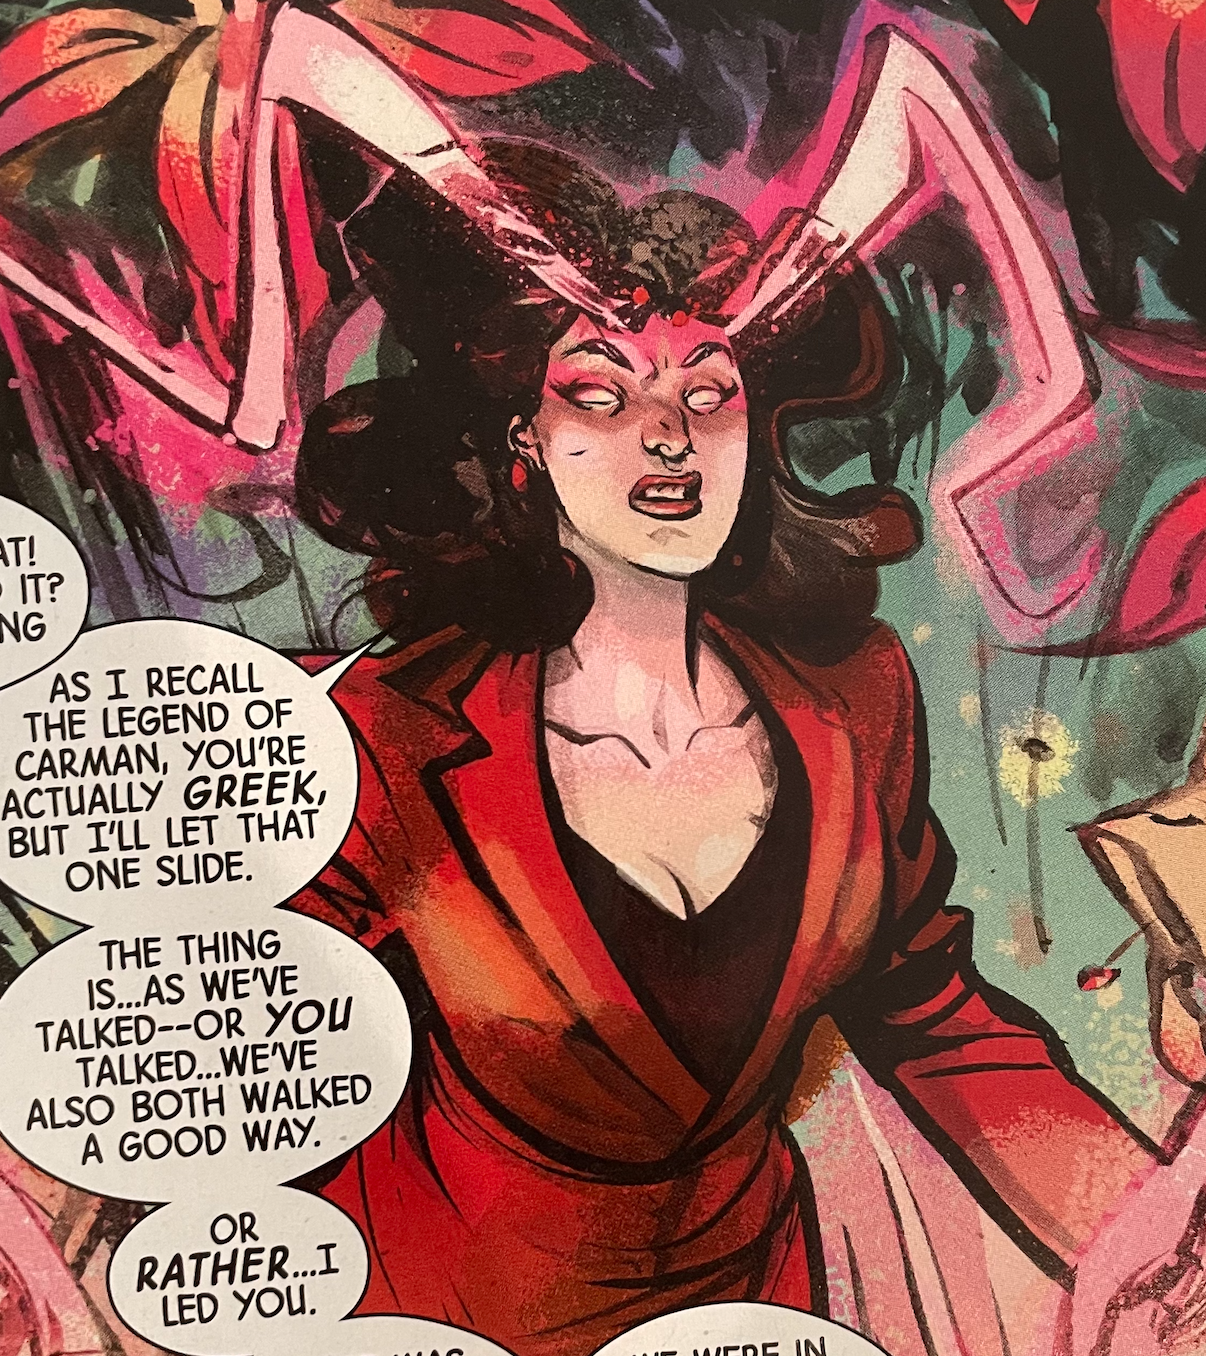 Comic Book Pull of the Week: 'Scarlet Witch #2